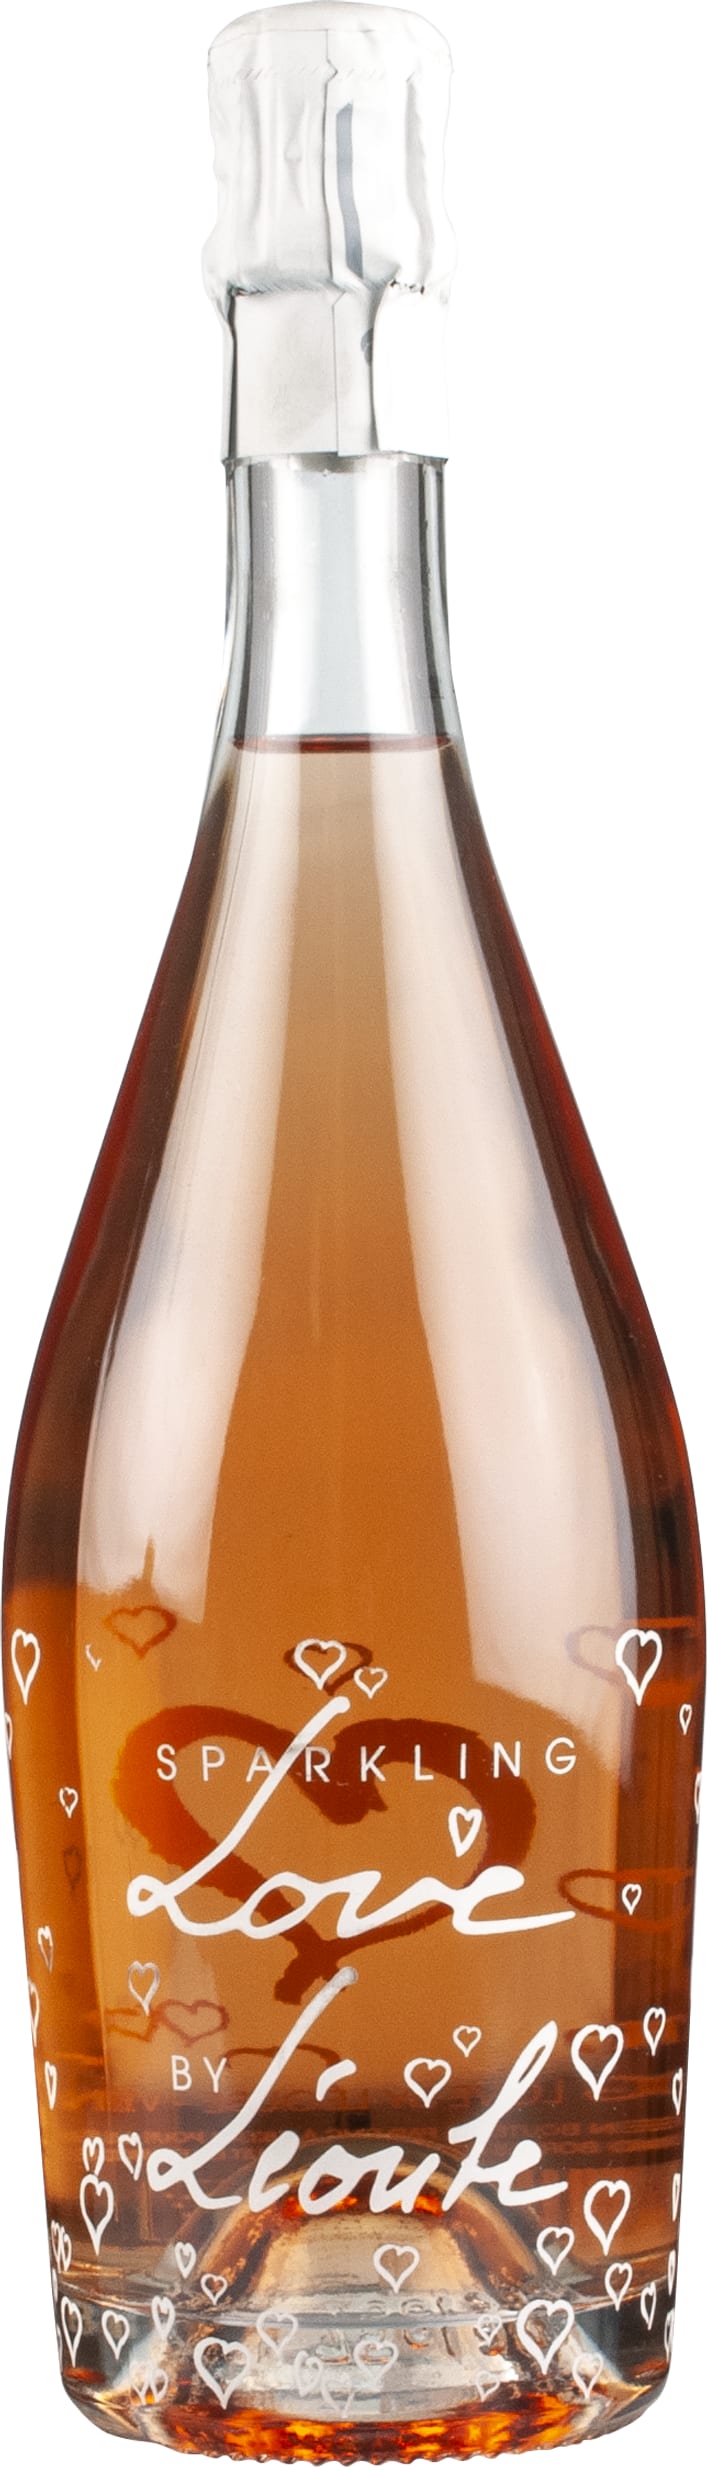 Chateau Leoube NV Sparkling Love by Leoube Organic Rose, Chateau 75cl NV - Buy Chateau Leoube Wines from GREAT WINES DIRECT wine shop